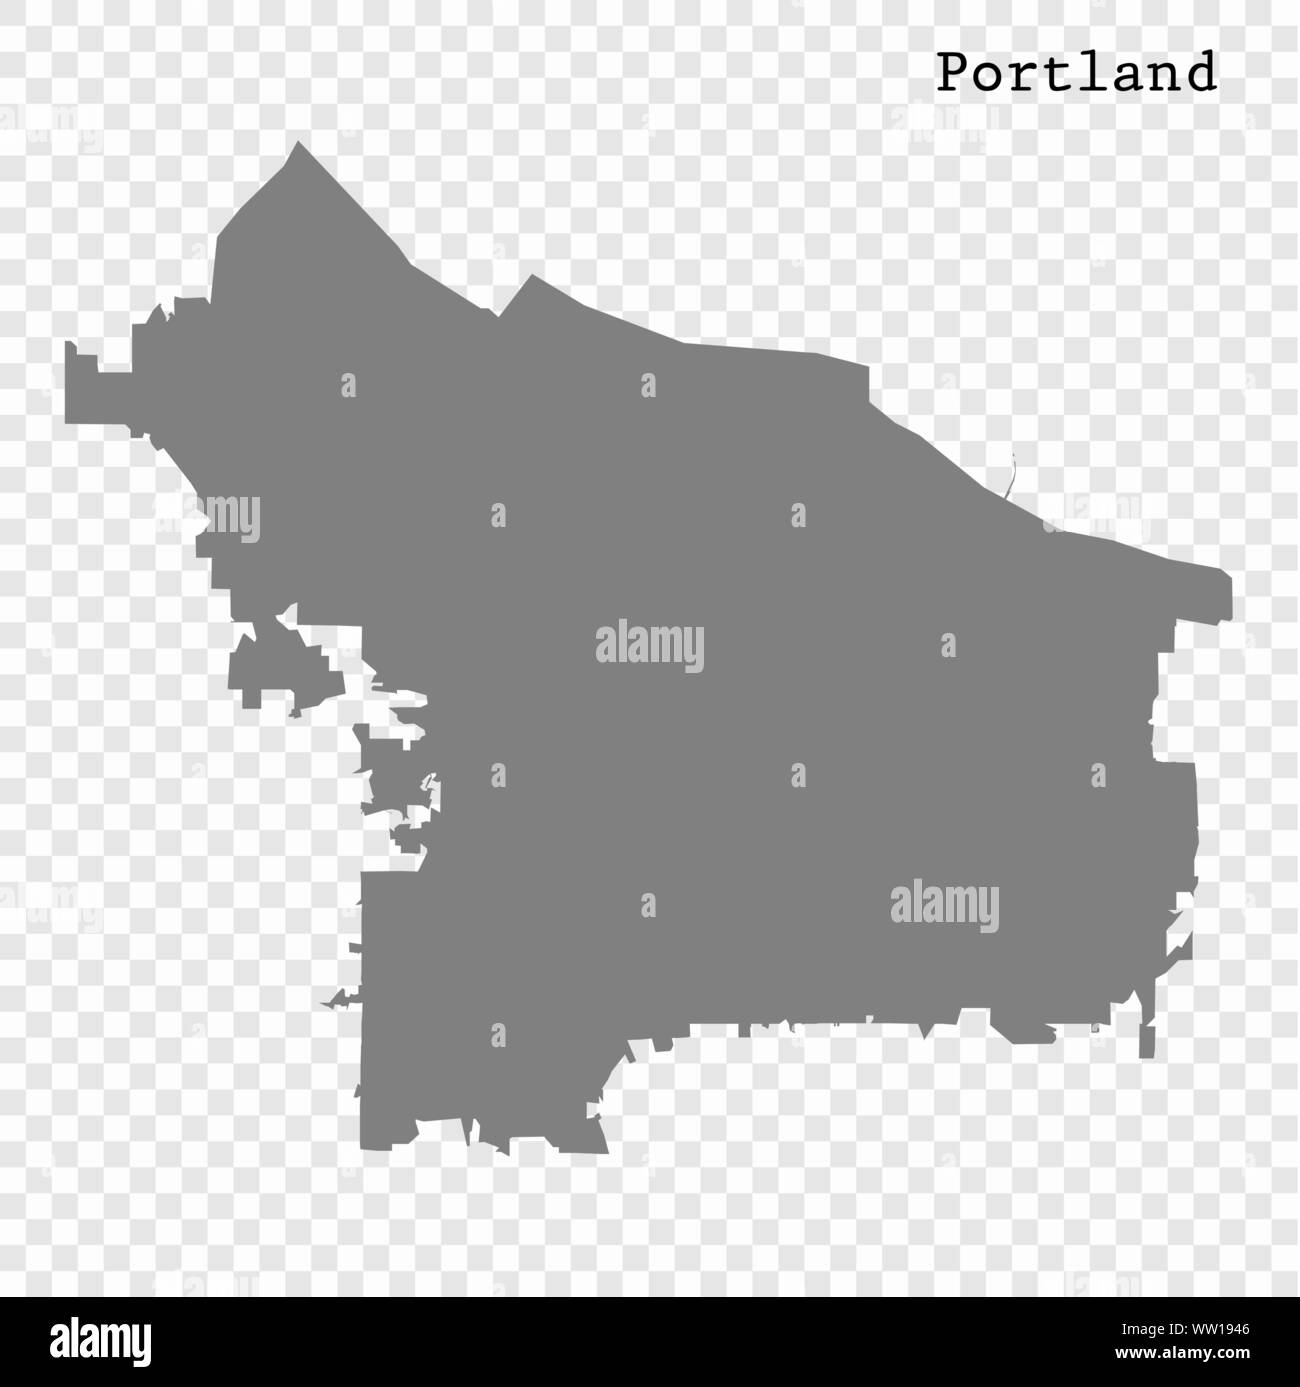 high-quality-map-portland-city-vector-illustration-stock-vector-image